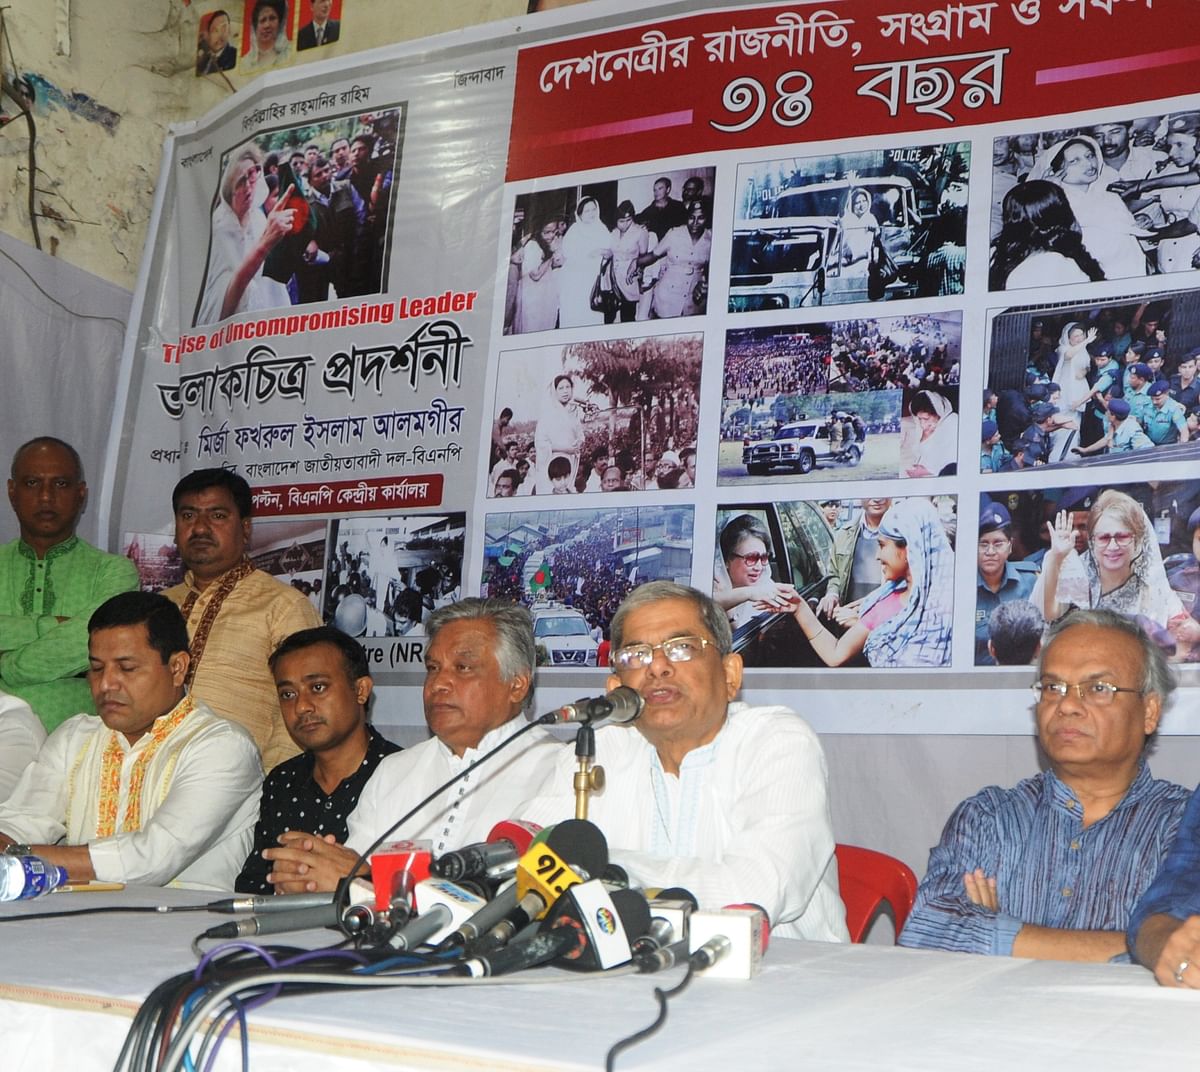 BNP secretary general Mirza Fakhrul Islam Alamgir speaks at a discussion and photo-exhibition at the party’s Naya Paltan central office on Friday. Photo: Prothom Alo